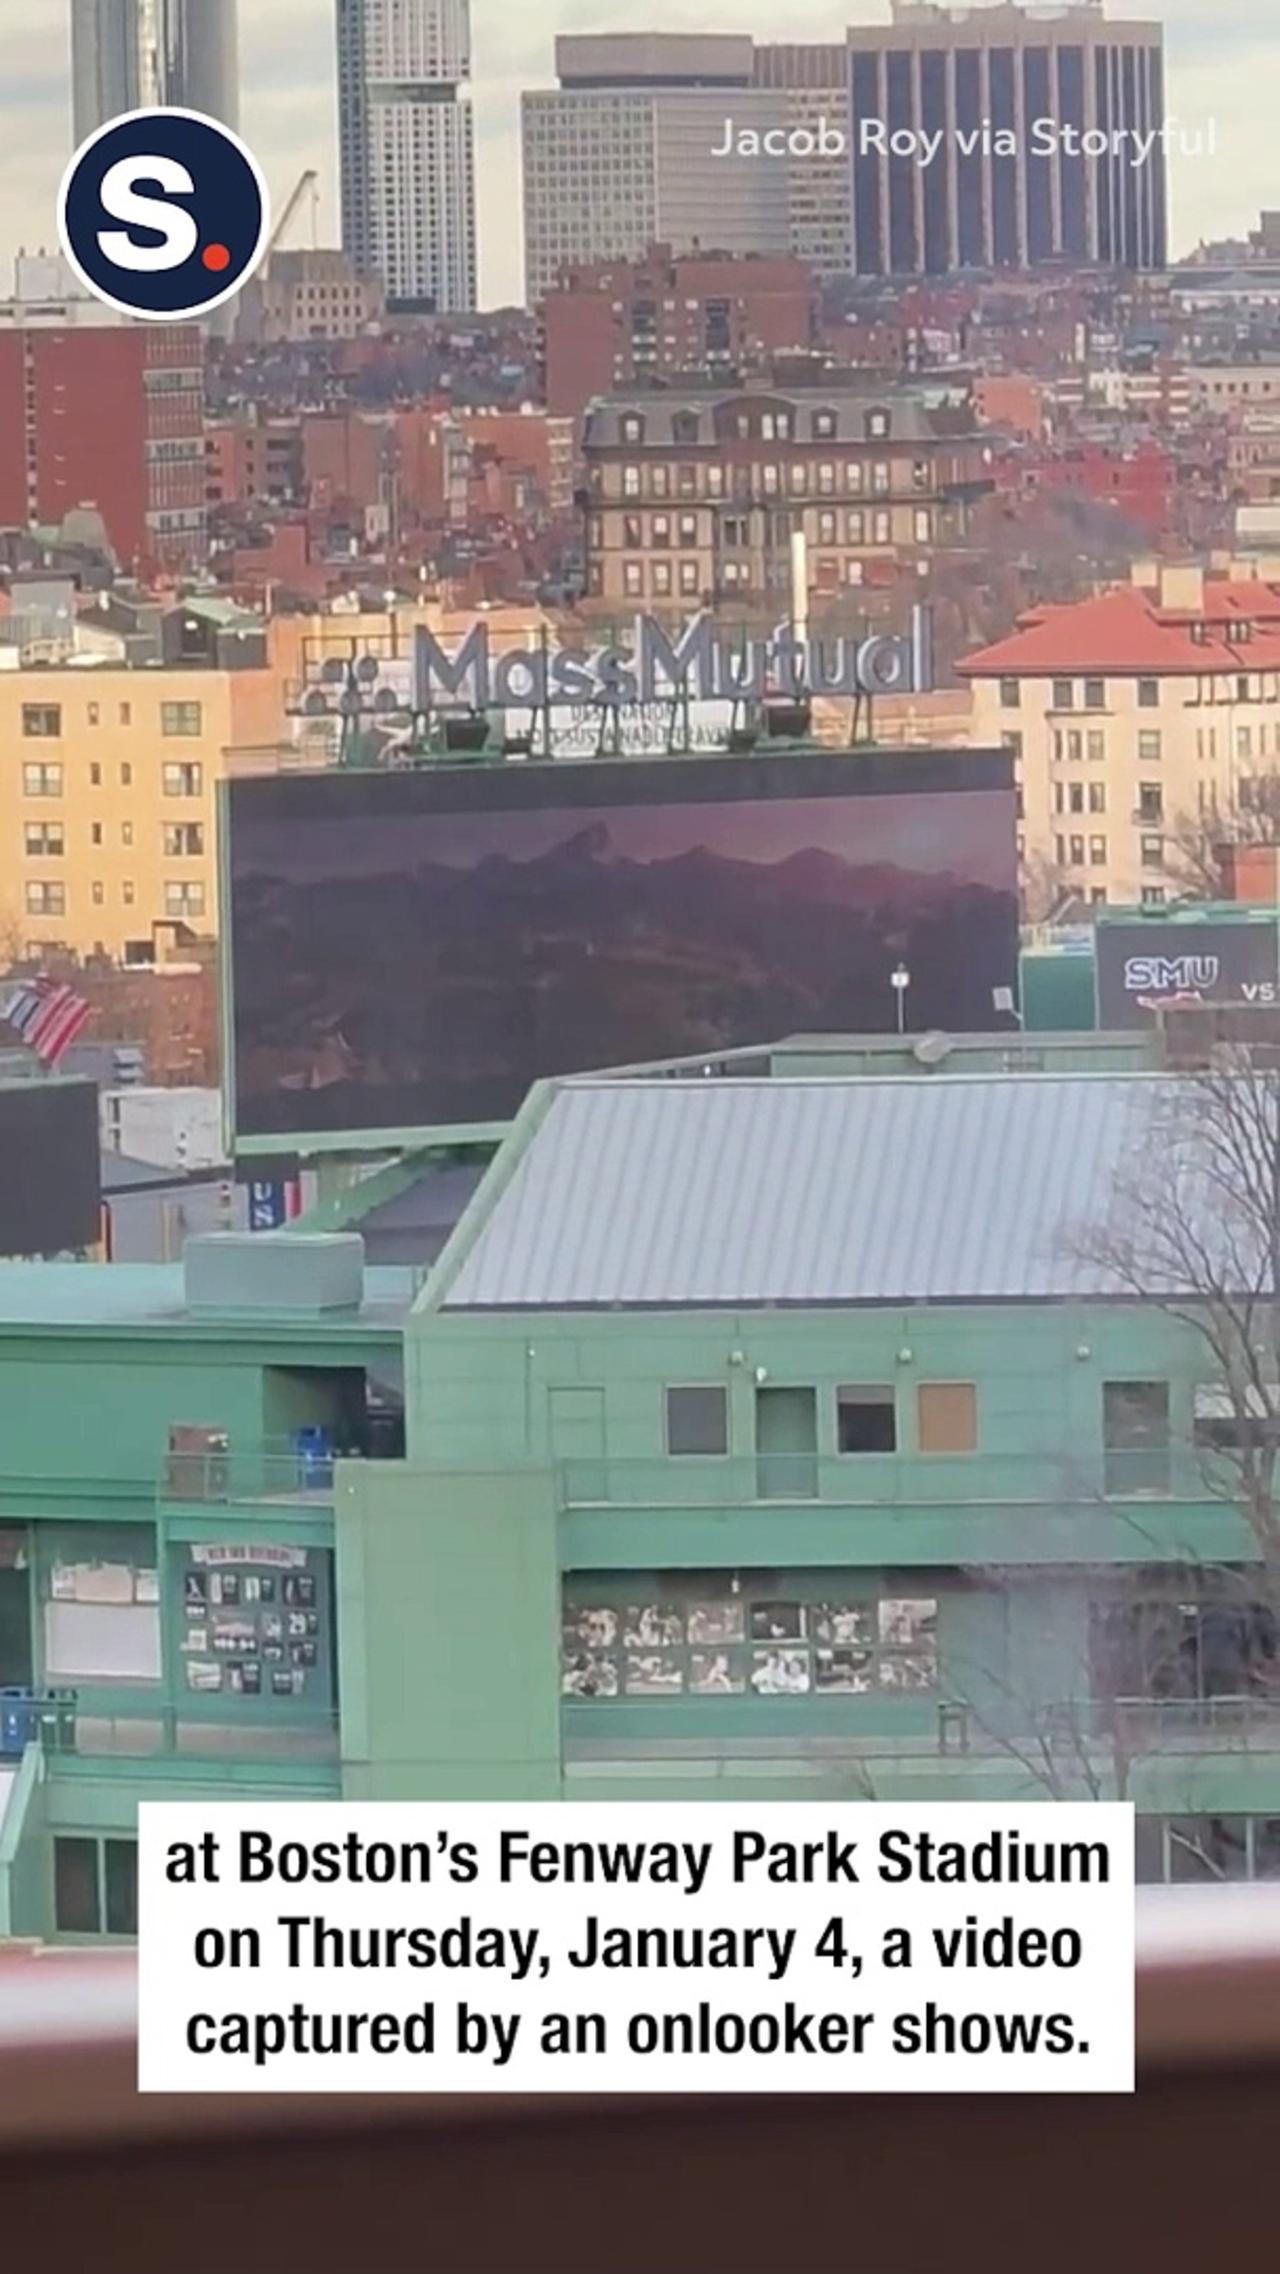 Mystery Fortnite Player Spotted Screening a Game on Fenway Park Jumbotron